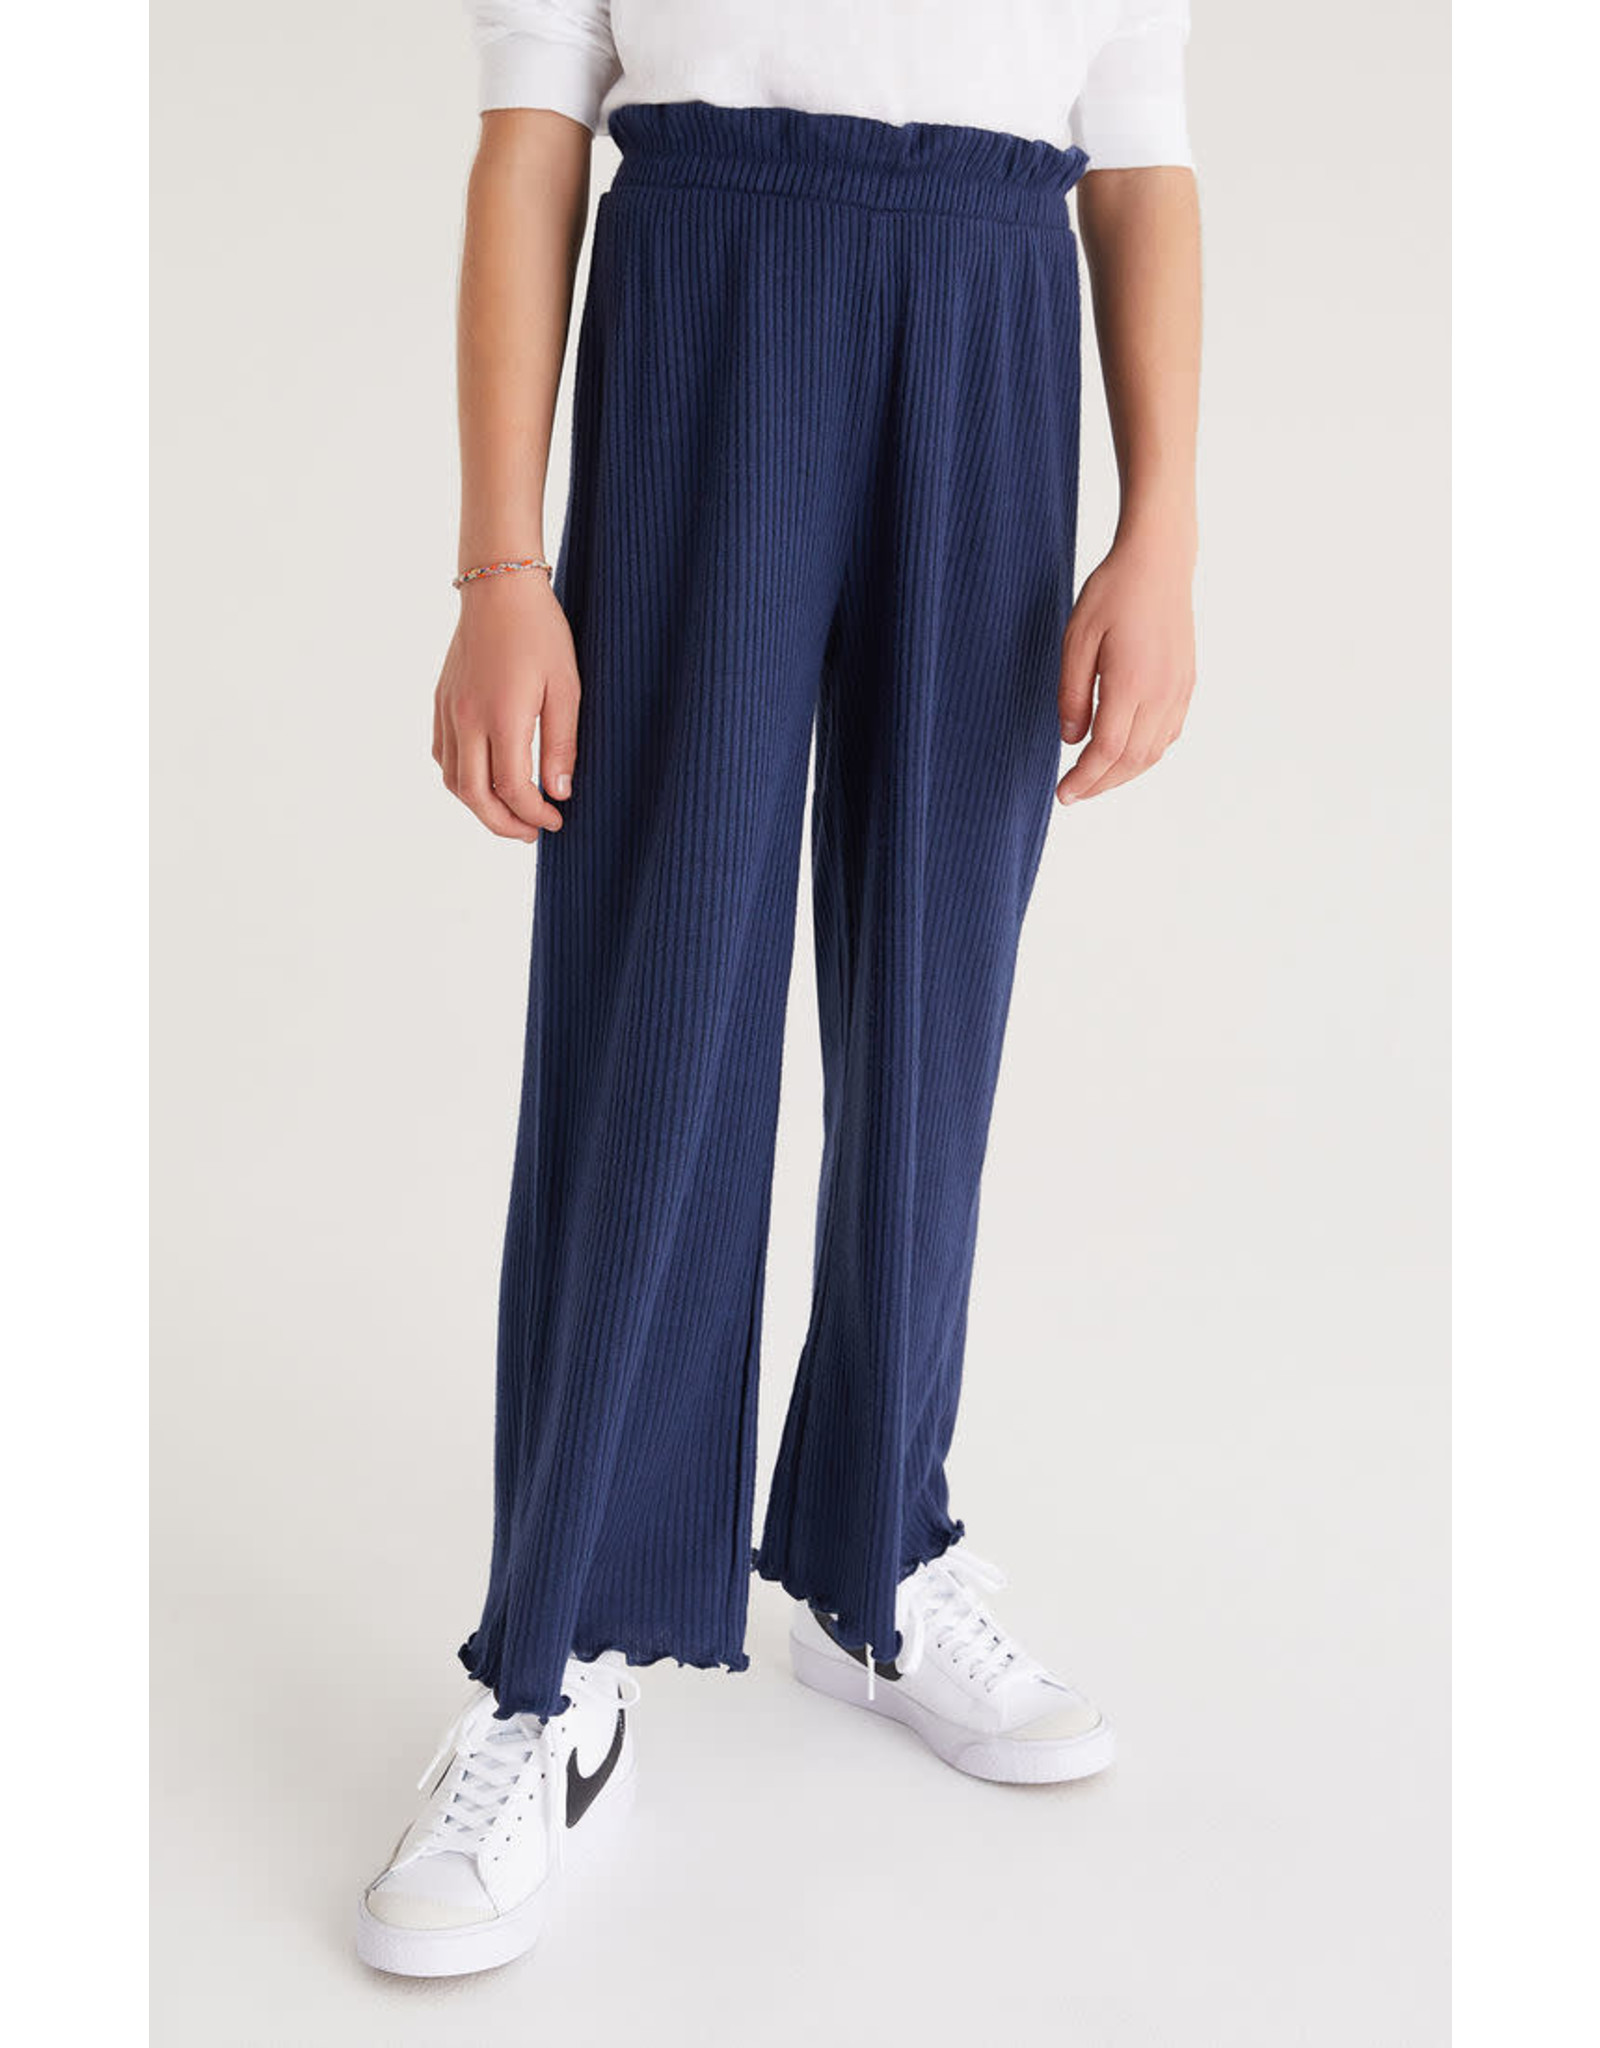 Z supply ZS Girls Andrea Pant